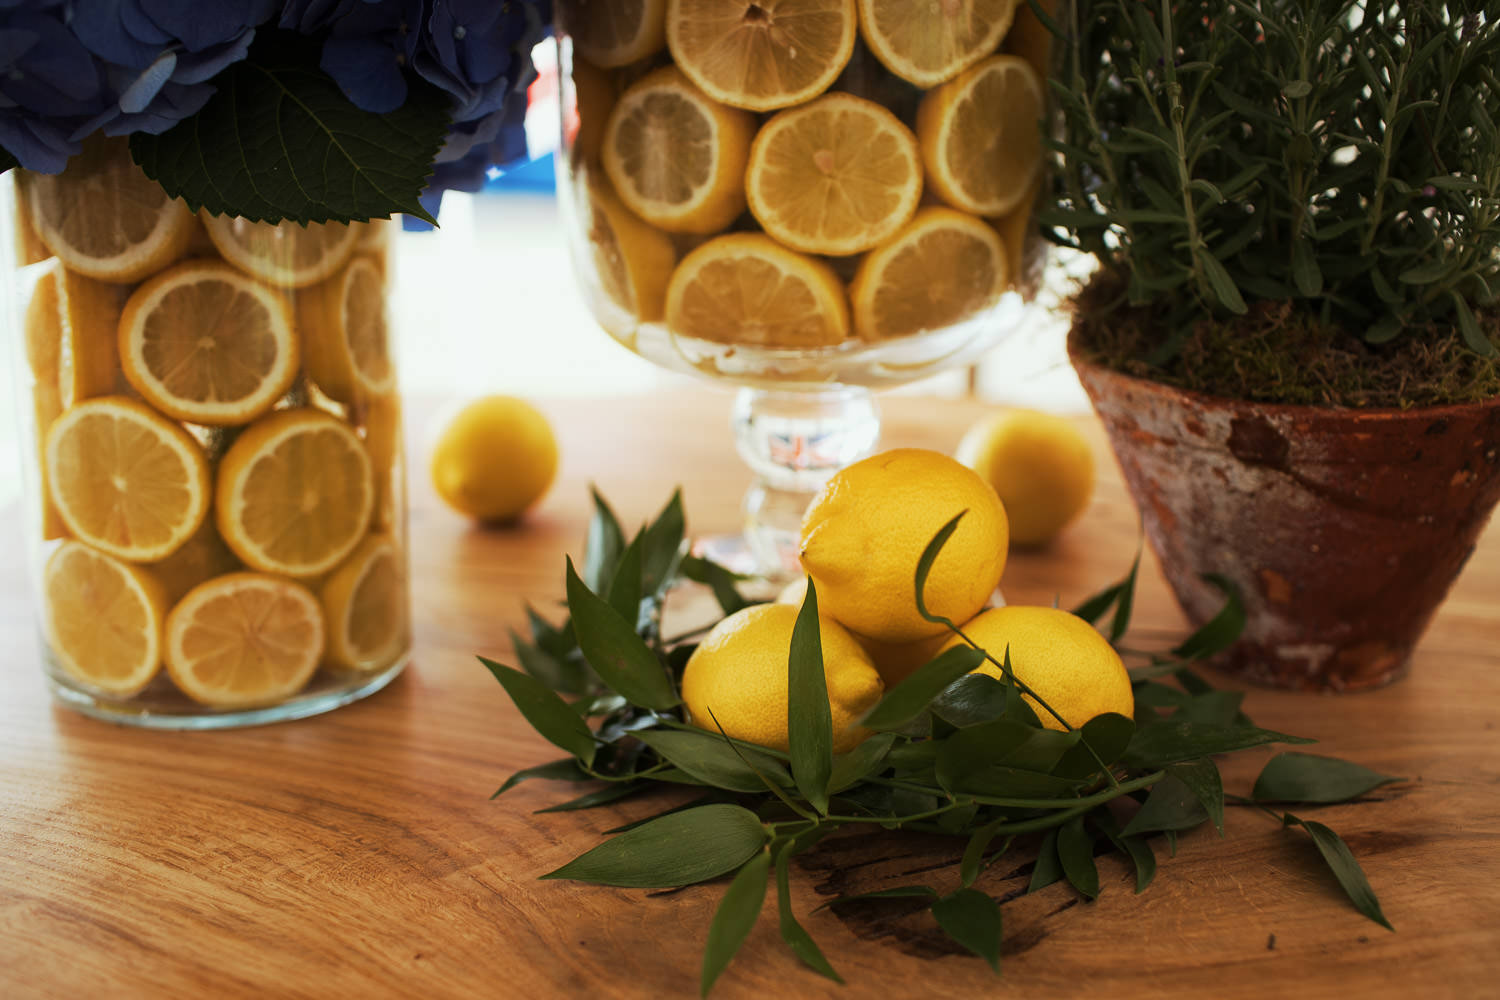 Lemons are on the bar as decoration.